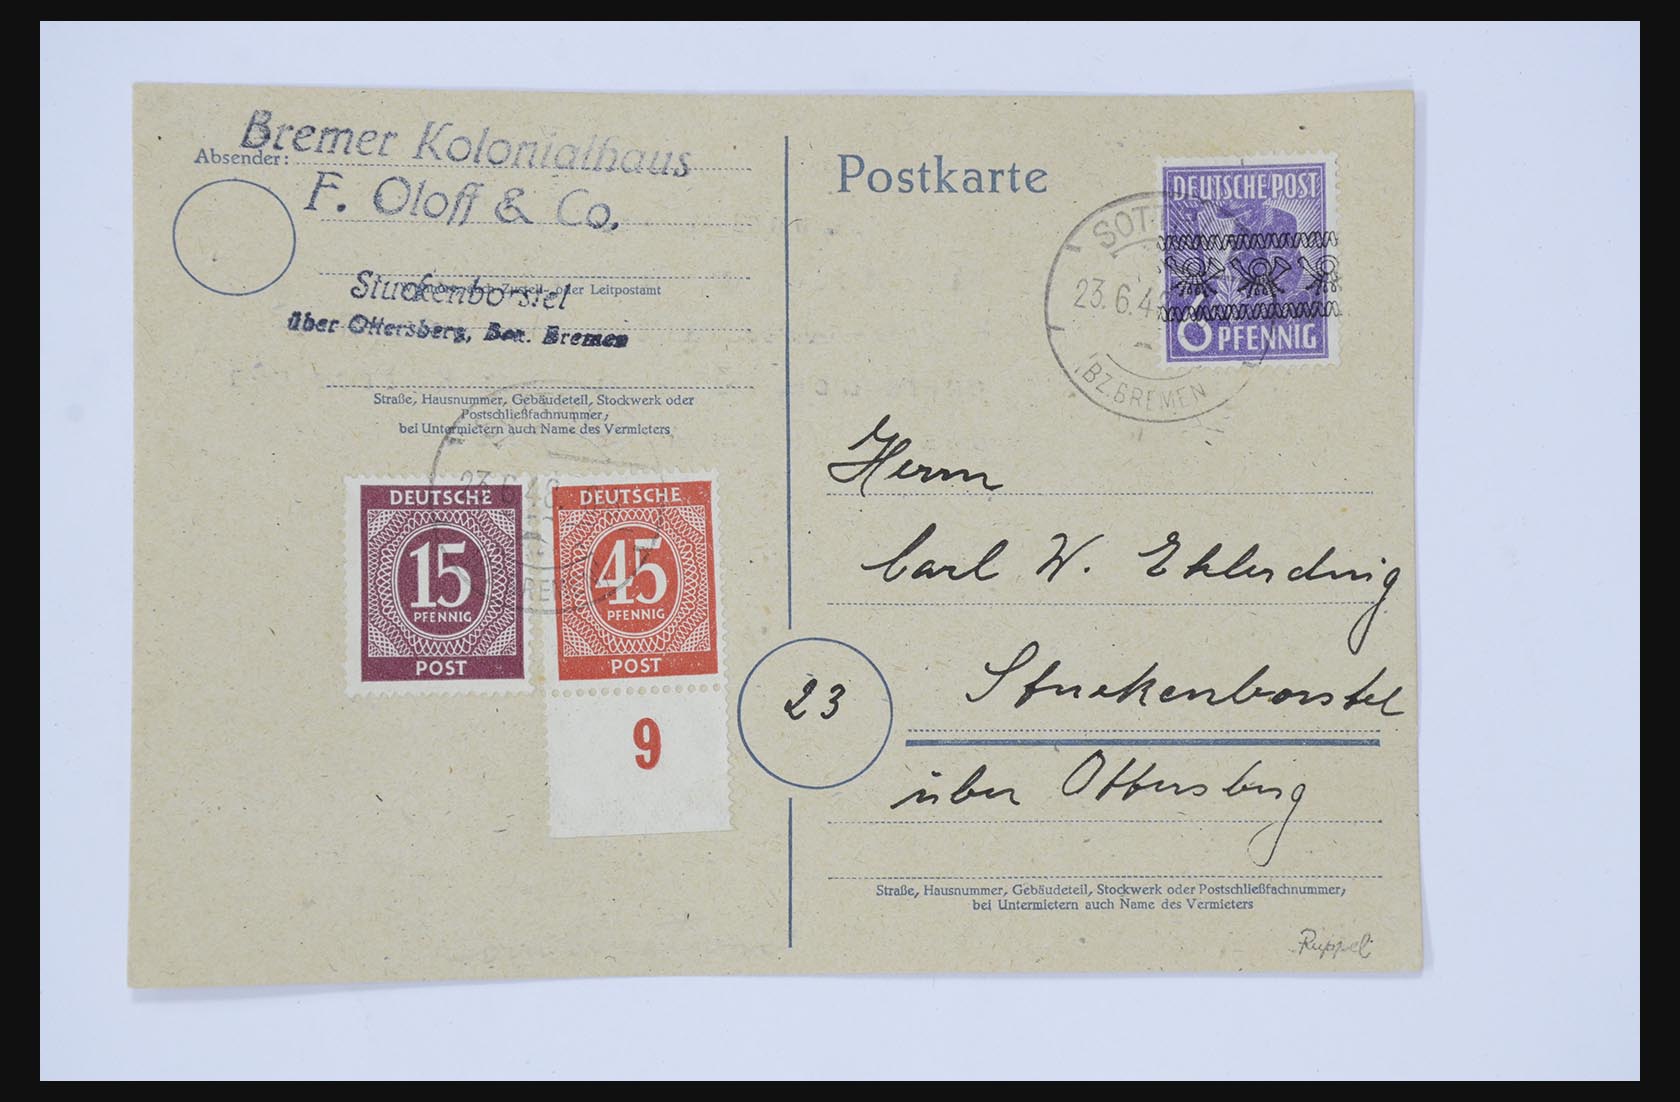 31581 038 - 31581 Germany covers and FDC's 1945-1981.